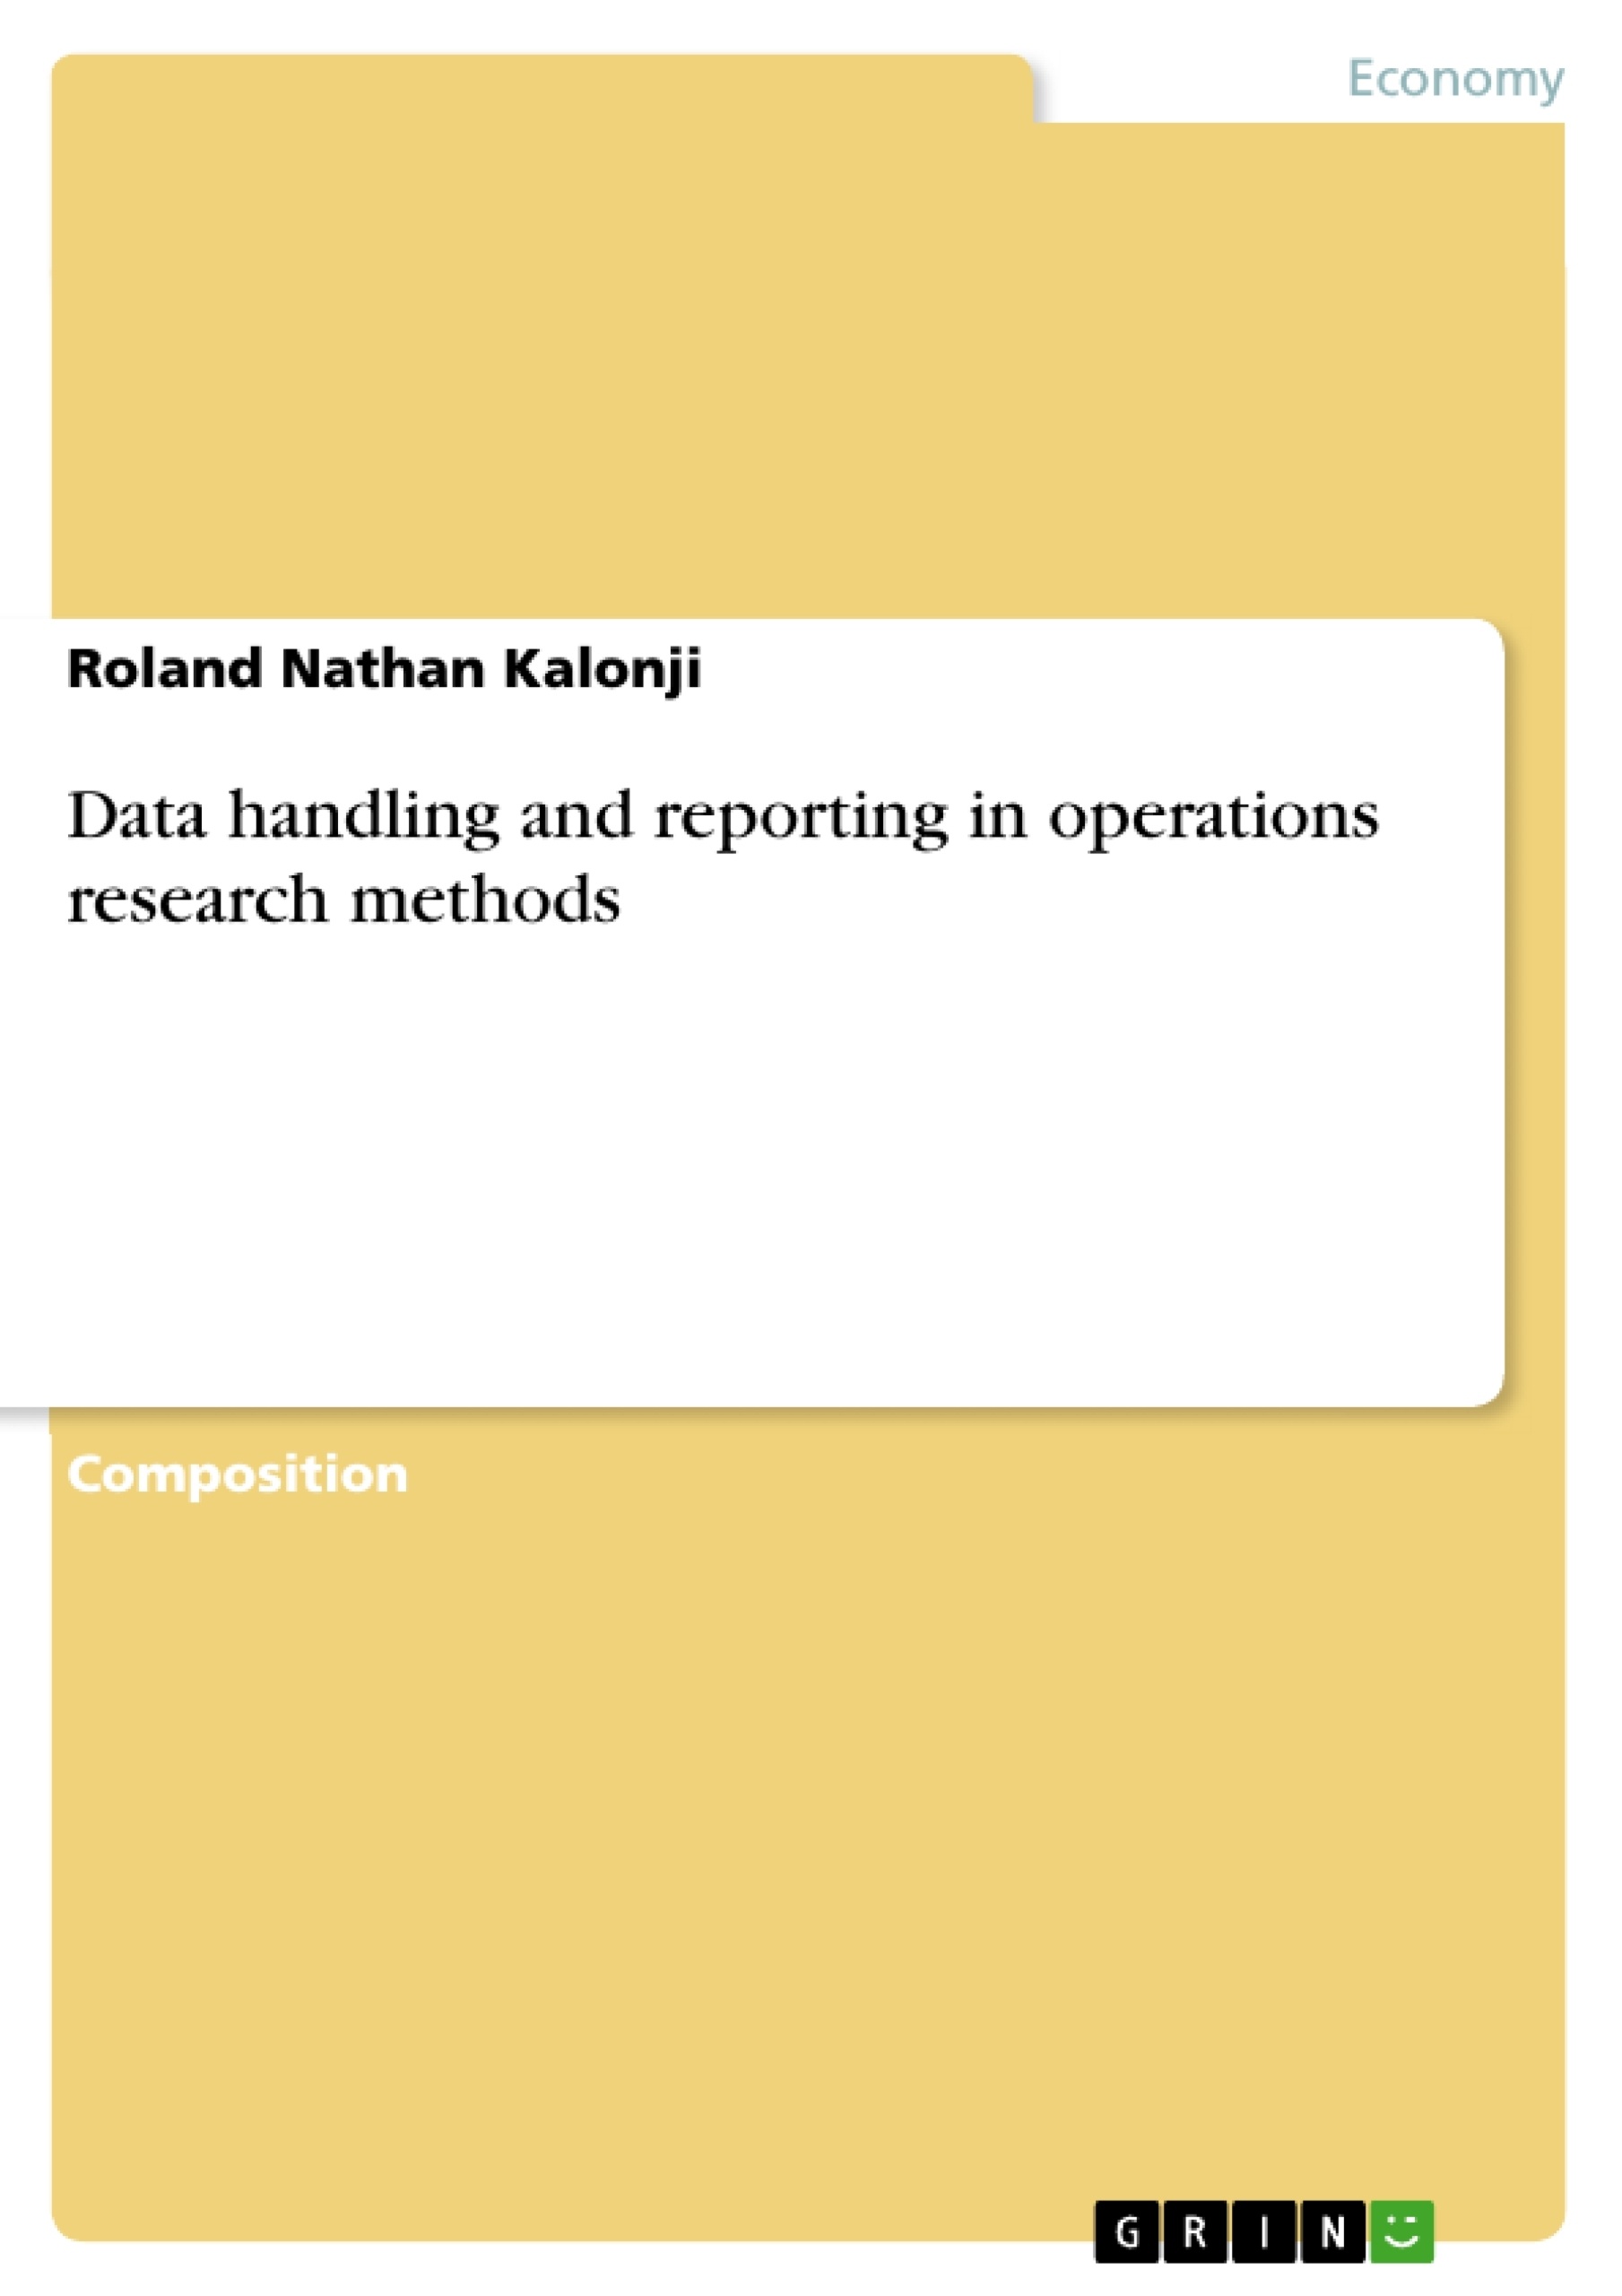 Title: Data handling and reporting in operations research methods